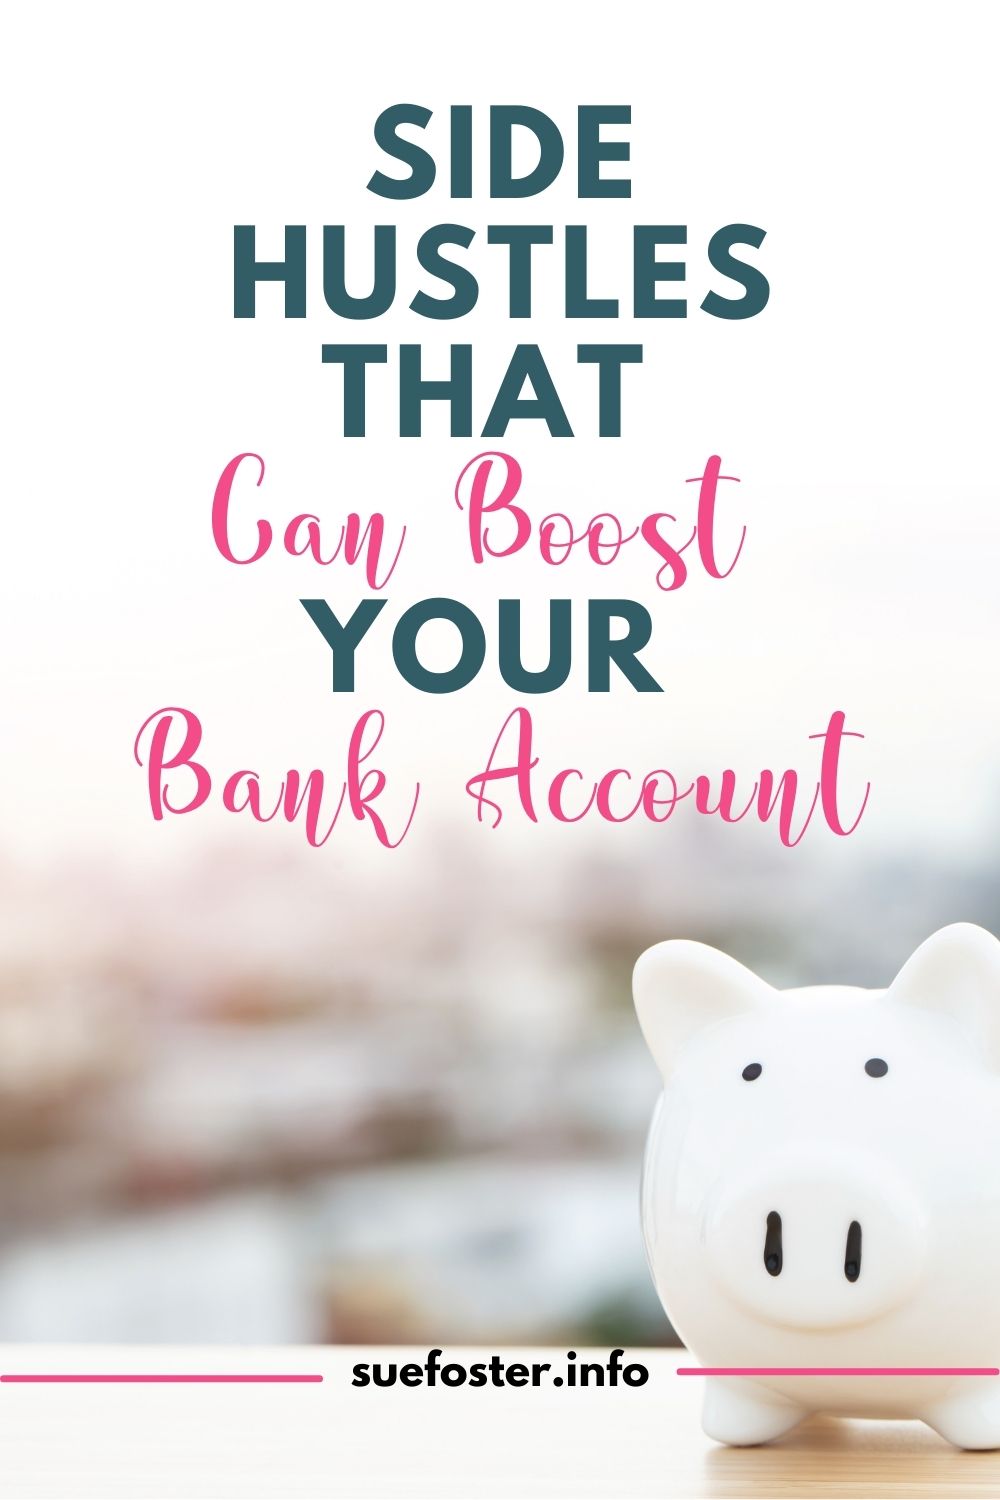 In this post, we are going to be taking a look at three side hustles that you may wish to consider if you really want to boost your income this year.